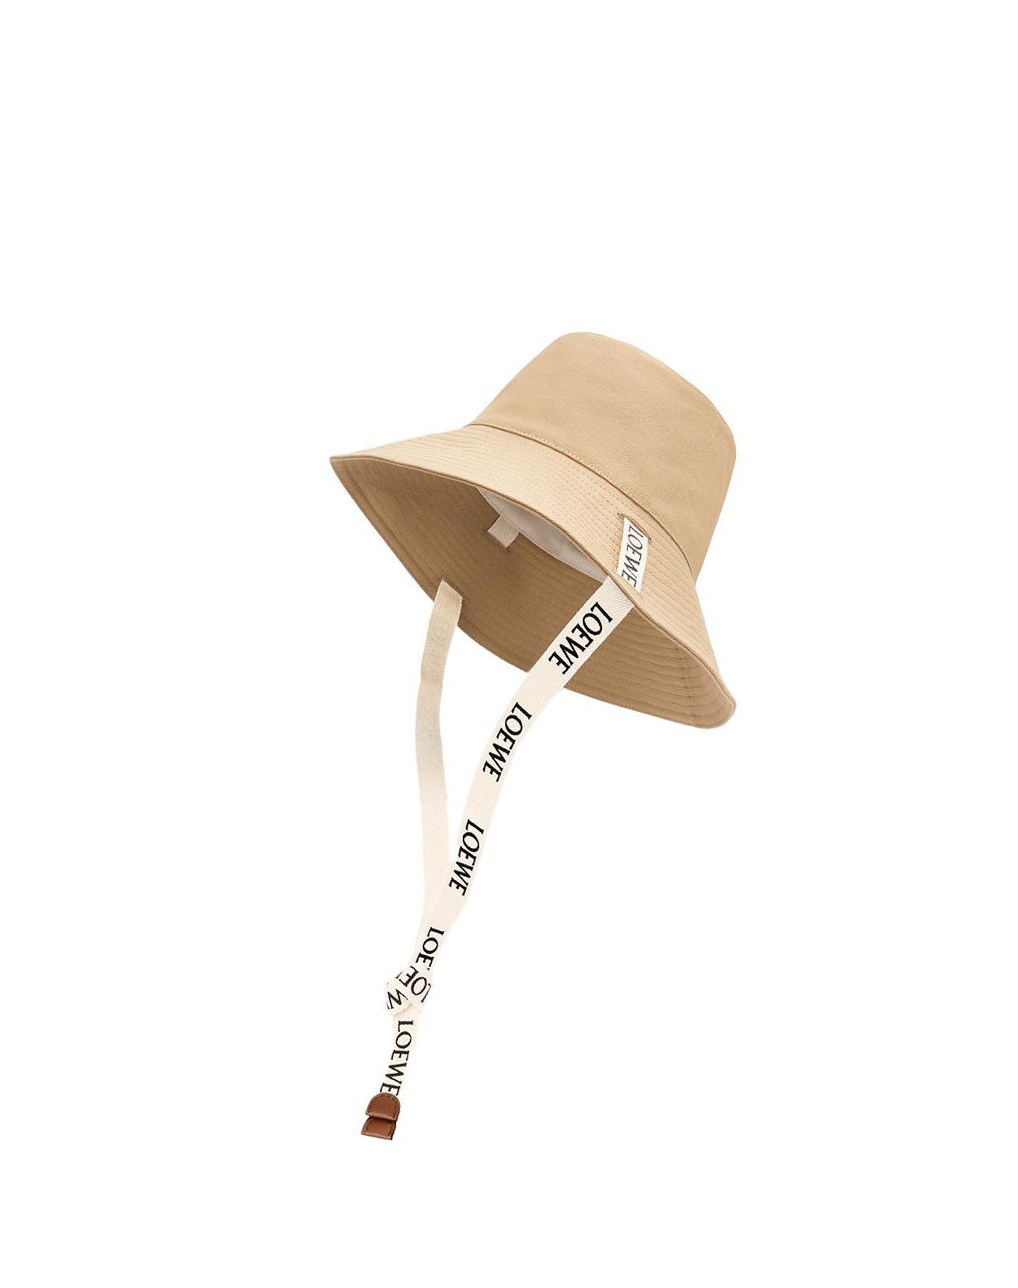 Loewe Fisherman hat in canvas and calfskin Sand | LH8217643